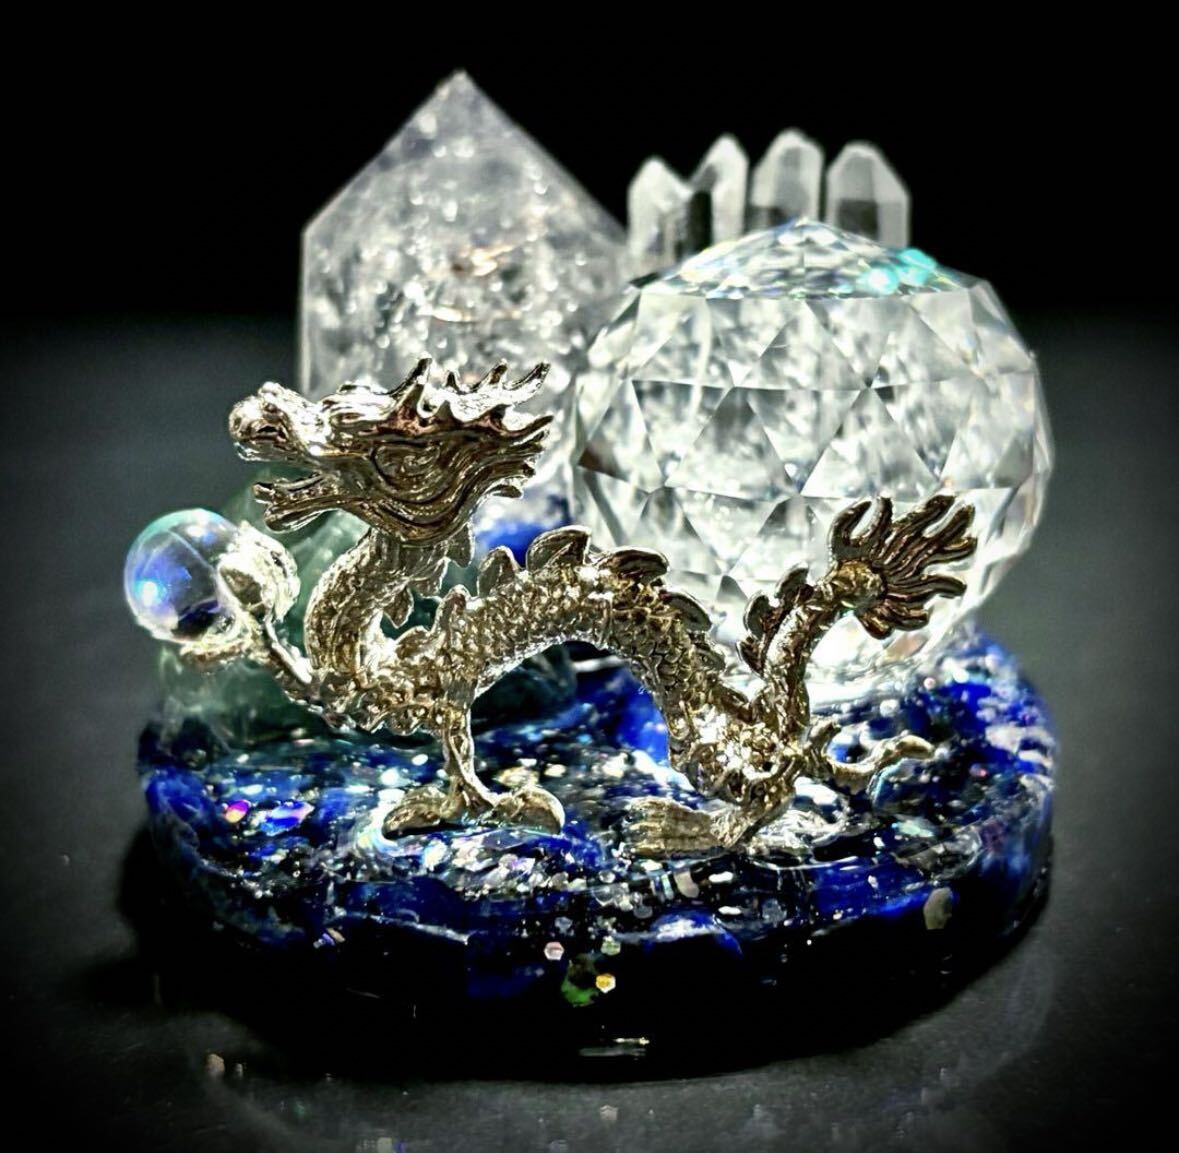 ◇Dragon and Mysterious Night◇Orgonite◇Object◇Lapis Lazuli◇Fluorite◇Amethyst◇Crystal◇, Handmade items, interior, miscellaneous goods, ornament, object